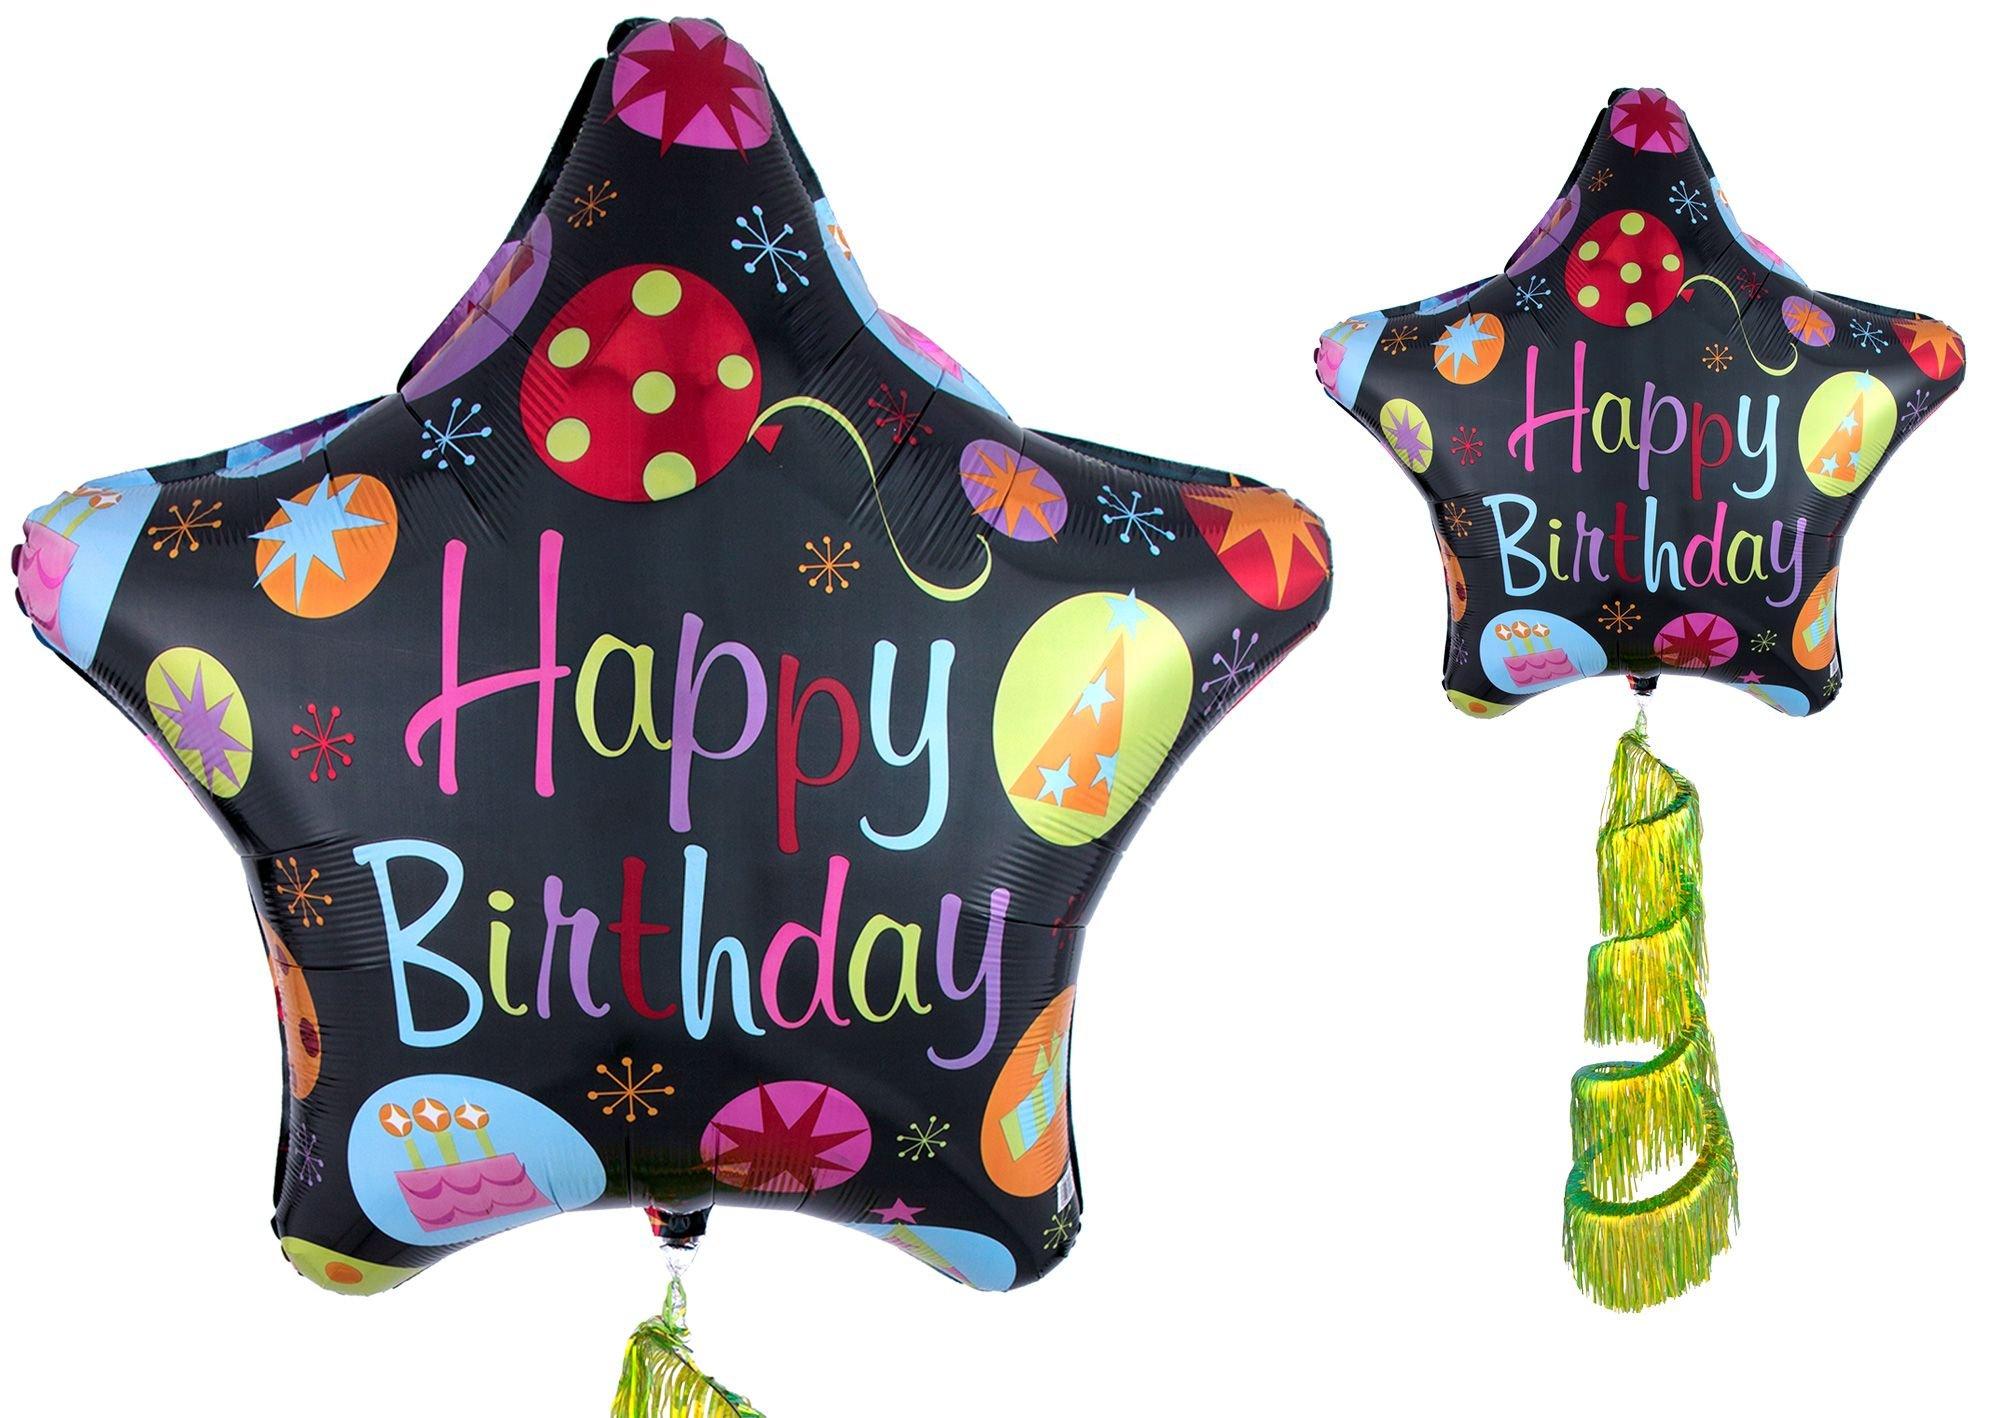 Giant Happy Birthday Star Balloon with Fringe Tail 31in